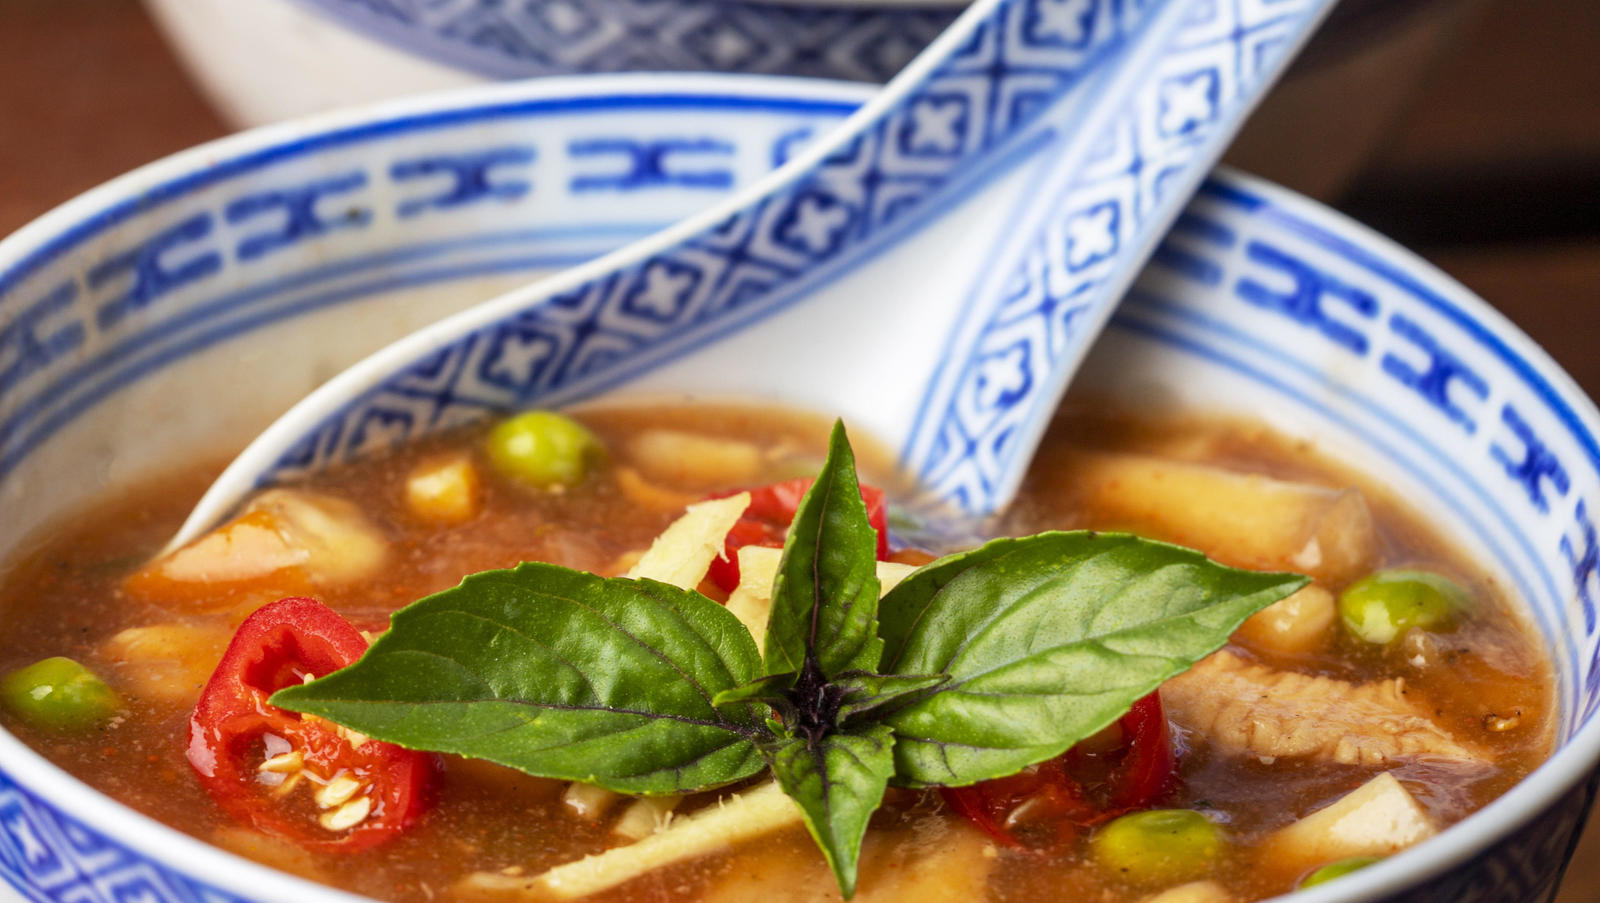 Chinese sweet and sour wood-fired soup